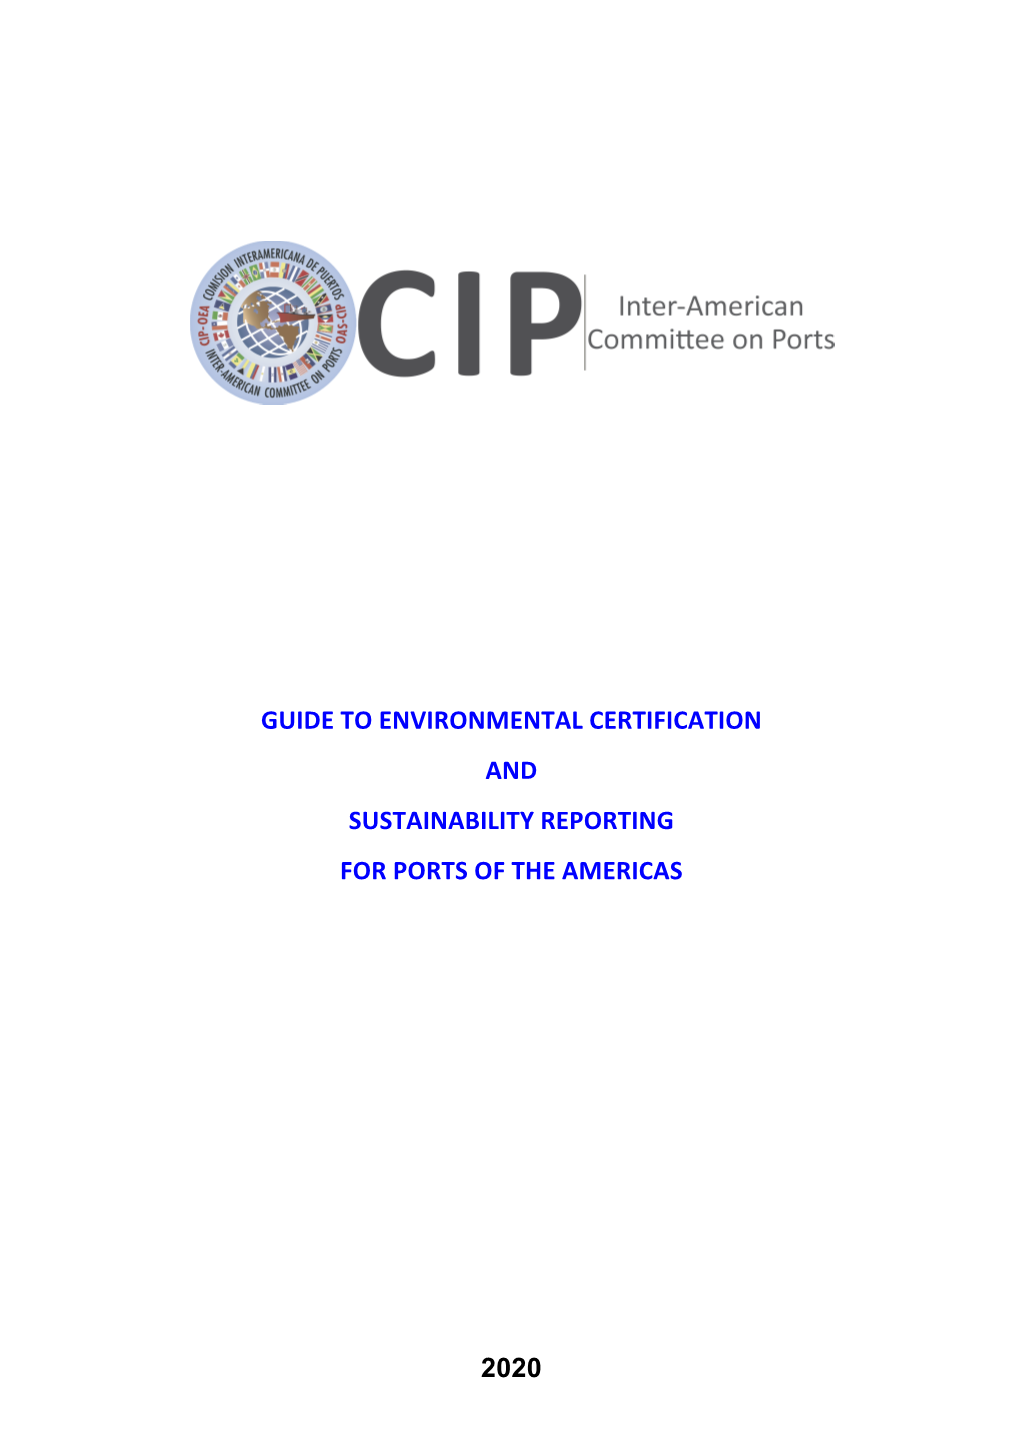 2020 Guide to Environmental Certification and Sustainability Reporting for Ports of the Americas